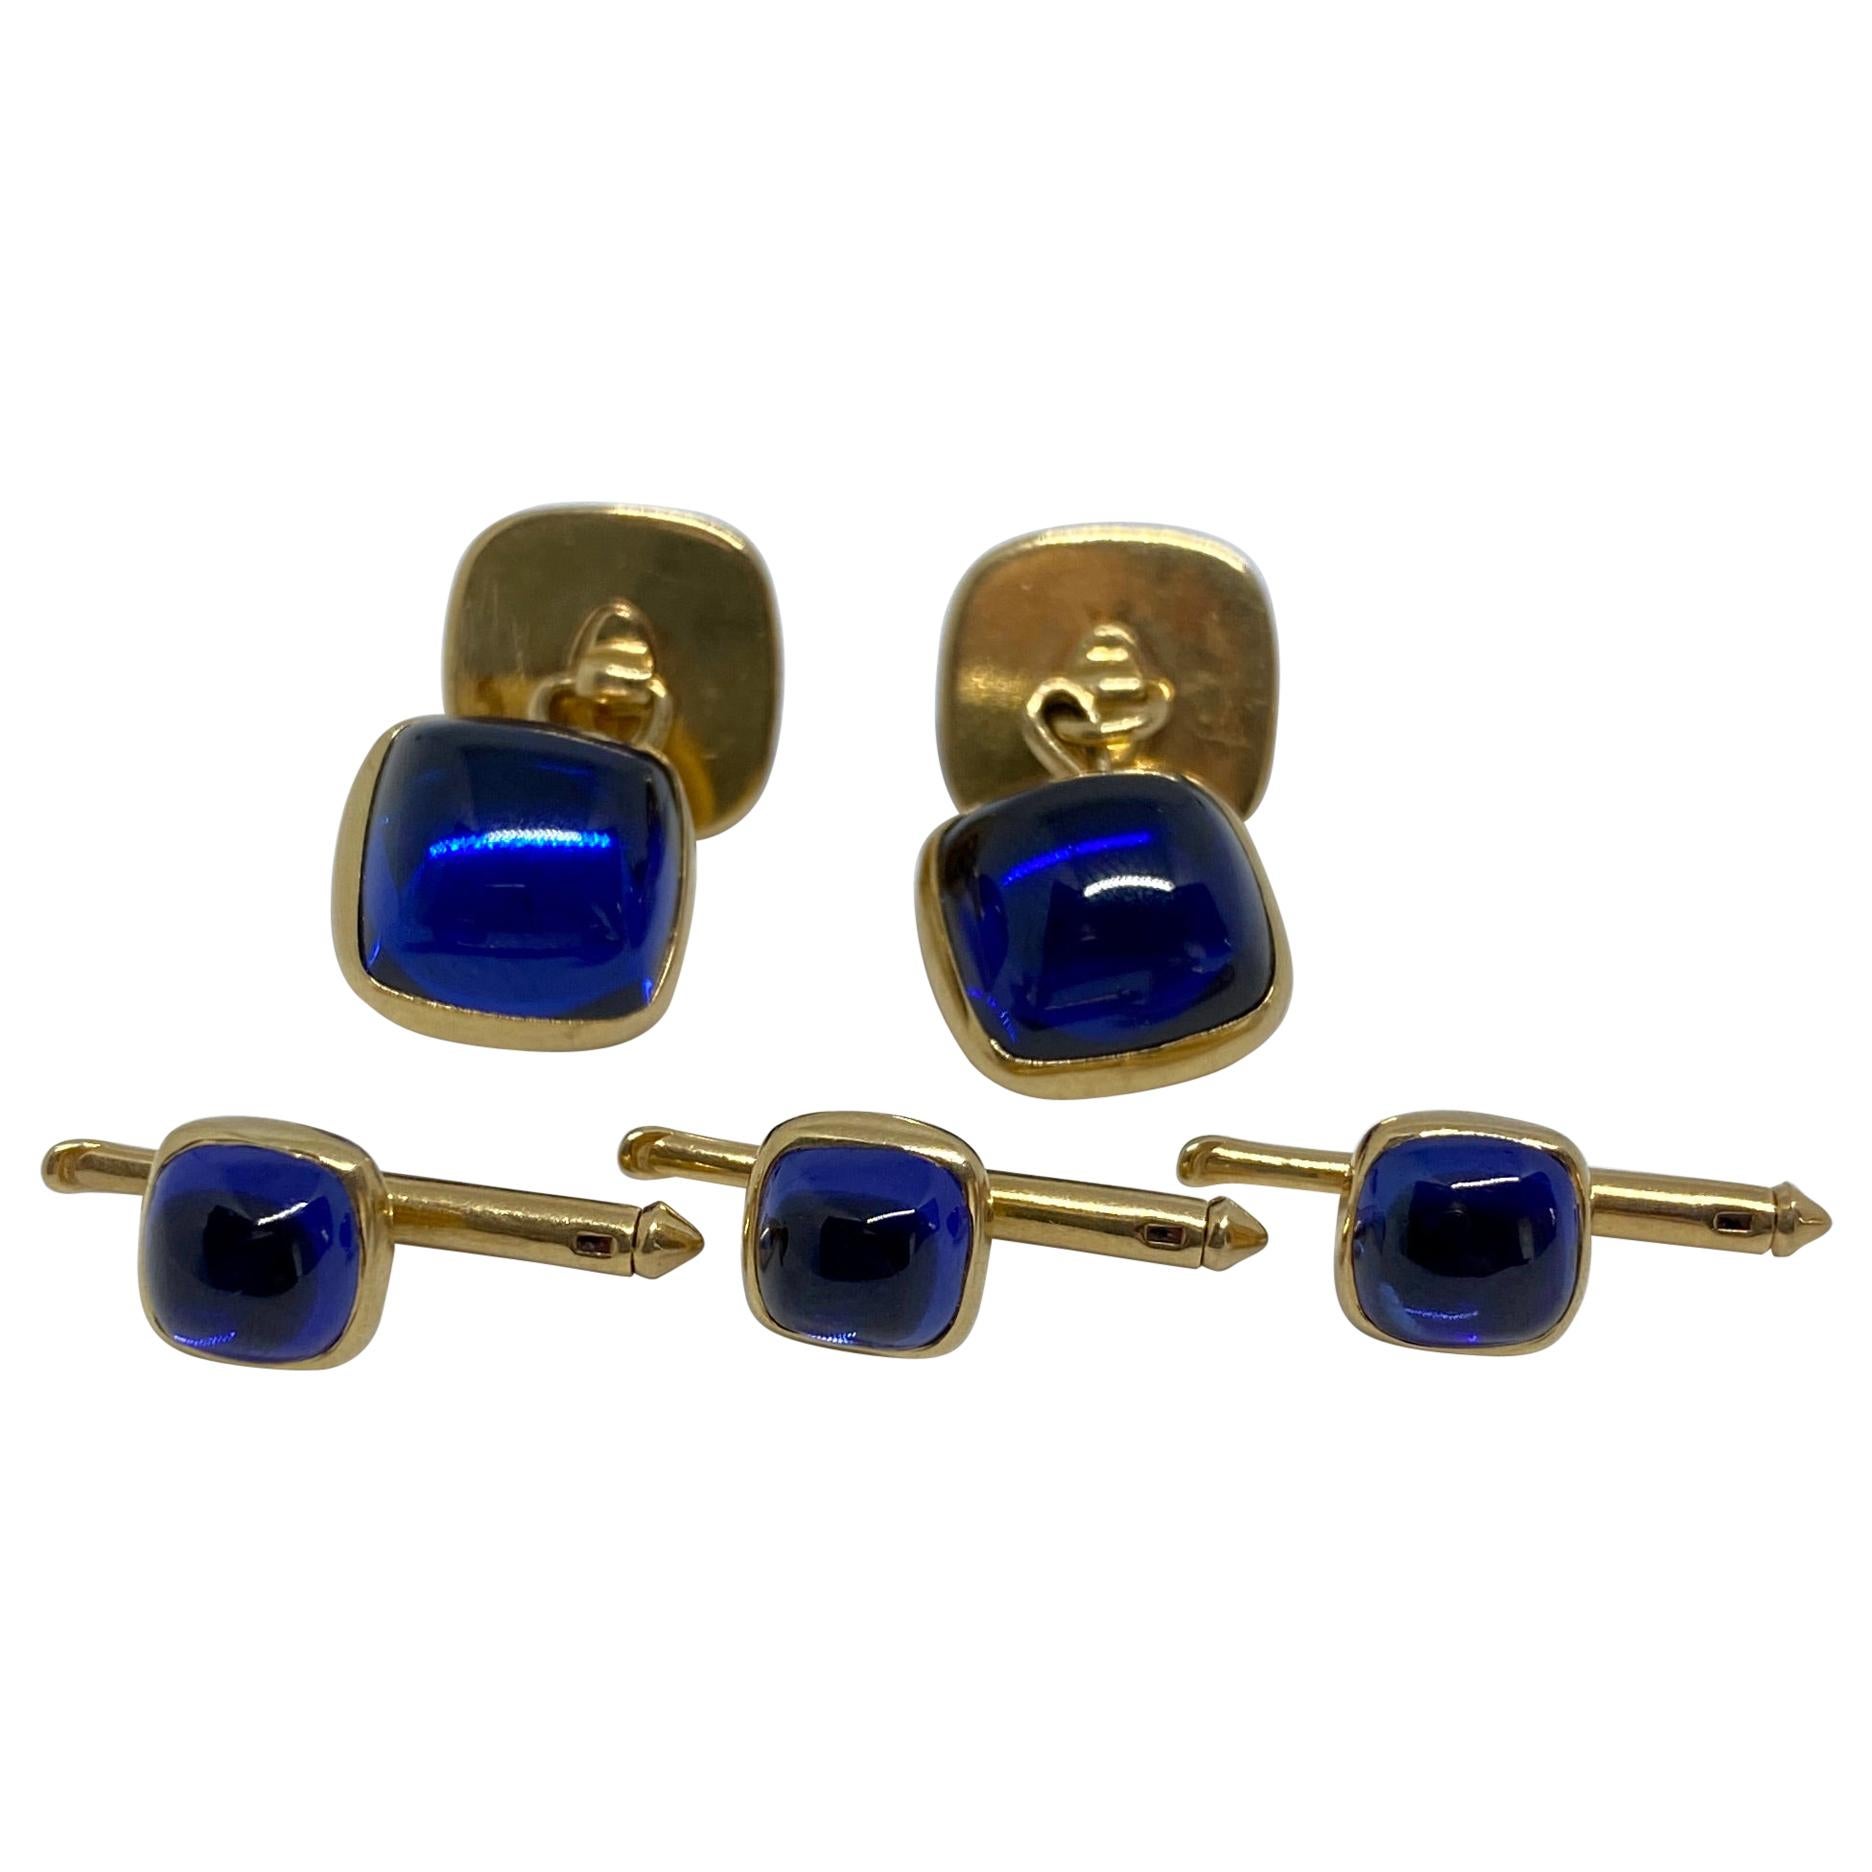 Art Deco Cufflinks and Studs in Yellow Gold with Sapphires by Larter & Sons